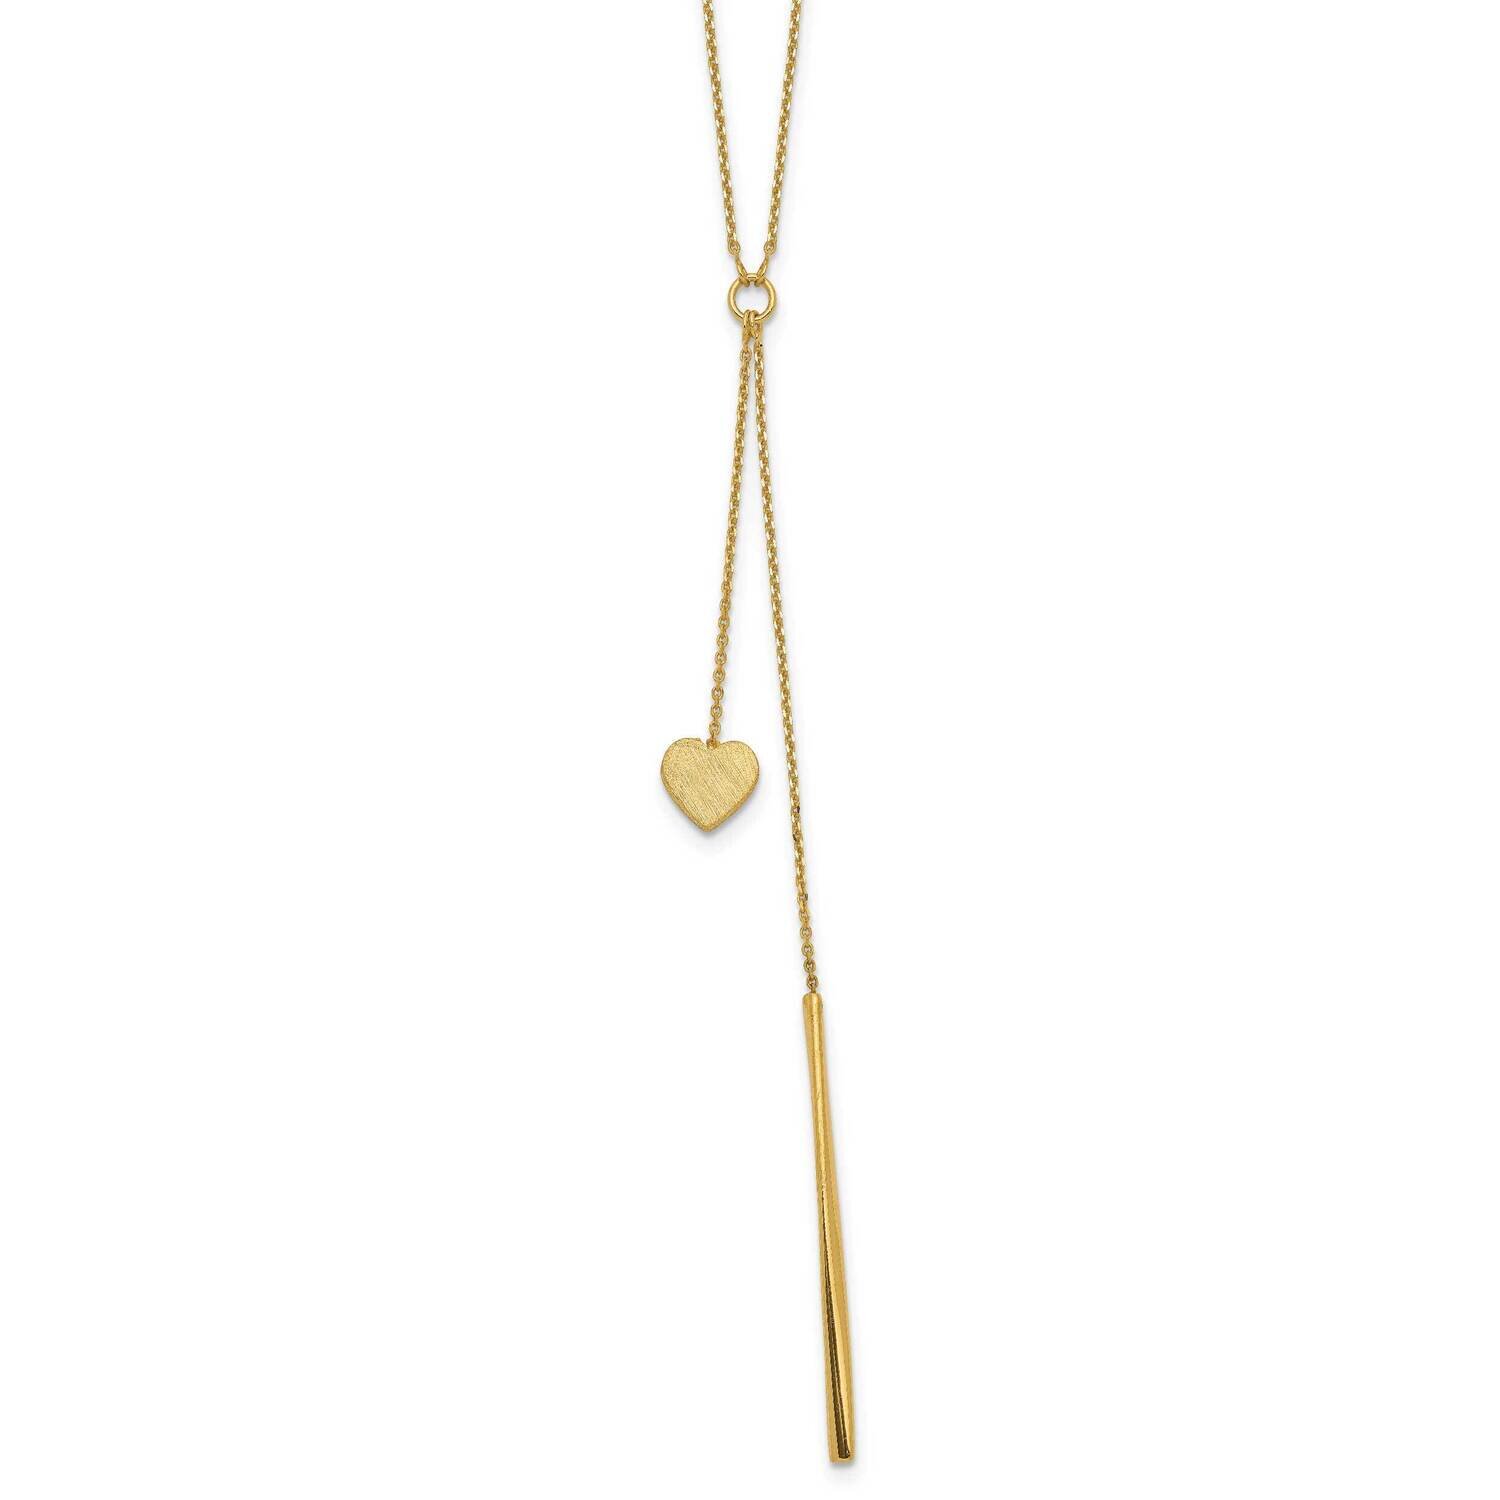 14K Polished Vertical Bar Brushed Heart with 2 Inch Extension Drop Necklace 14k Gold Polished SF2868-16